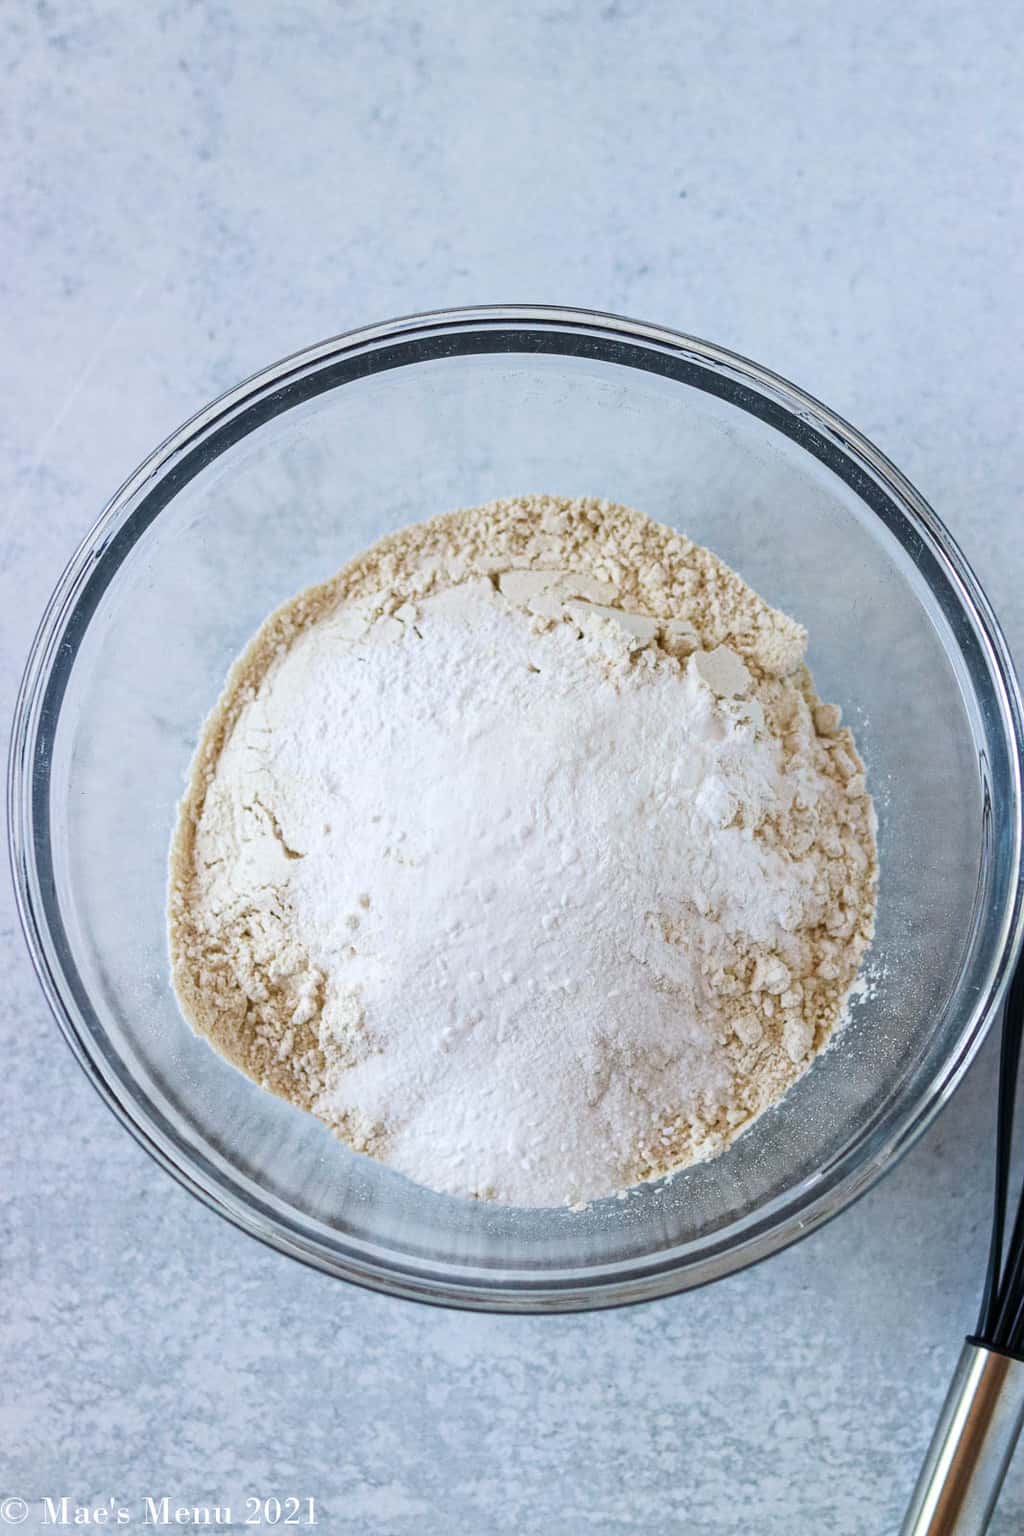 Flour and the rest of the dry ingredients in a glass mixing bowl